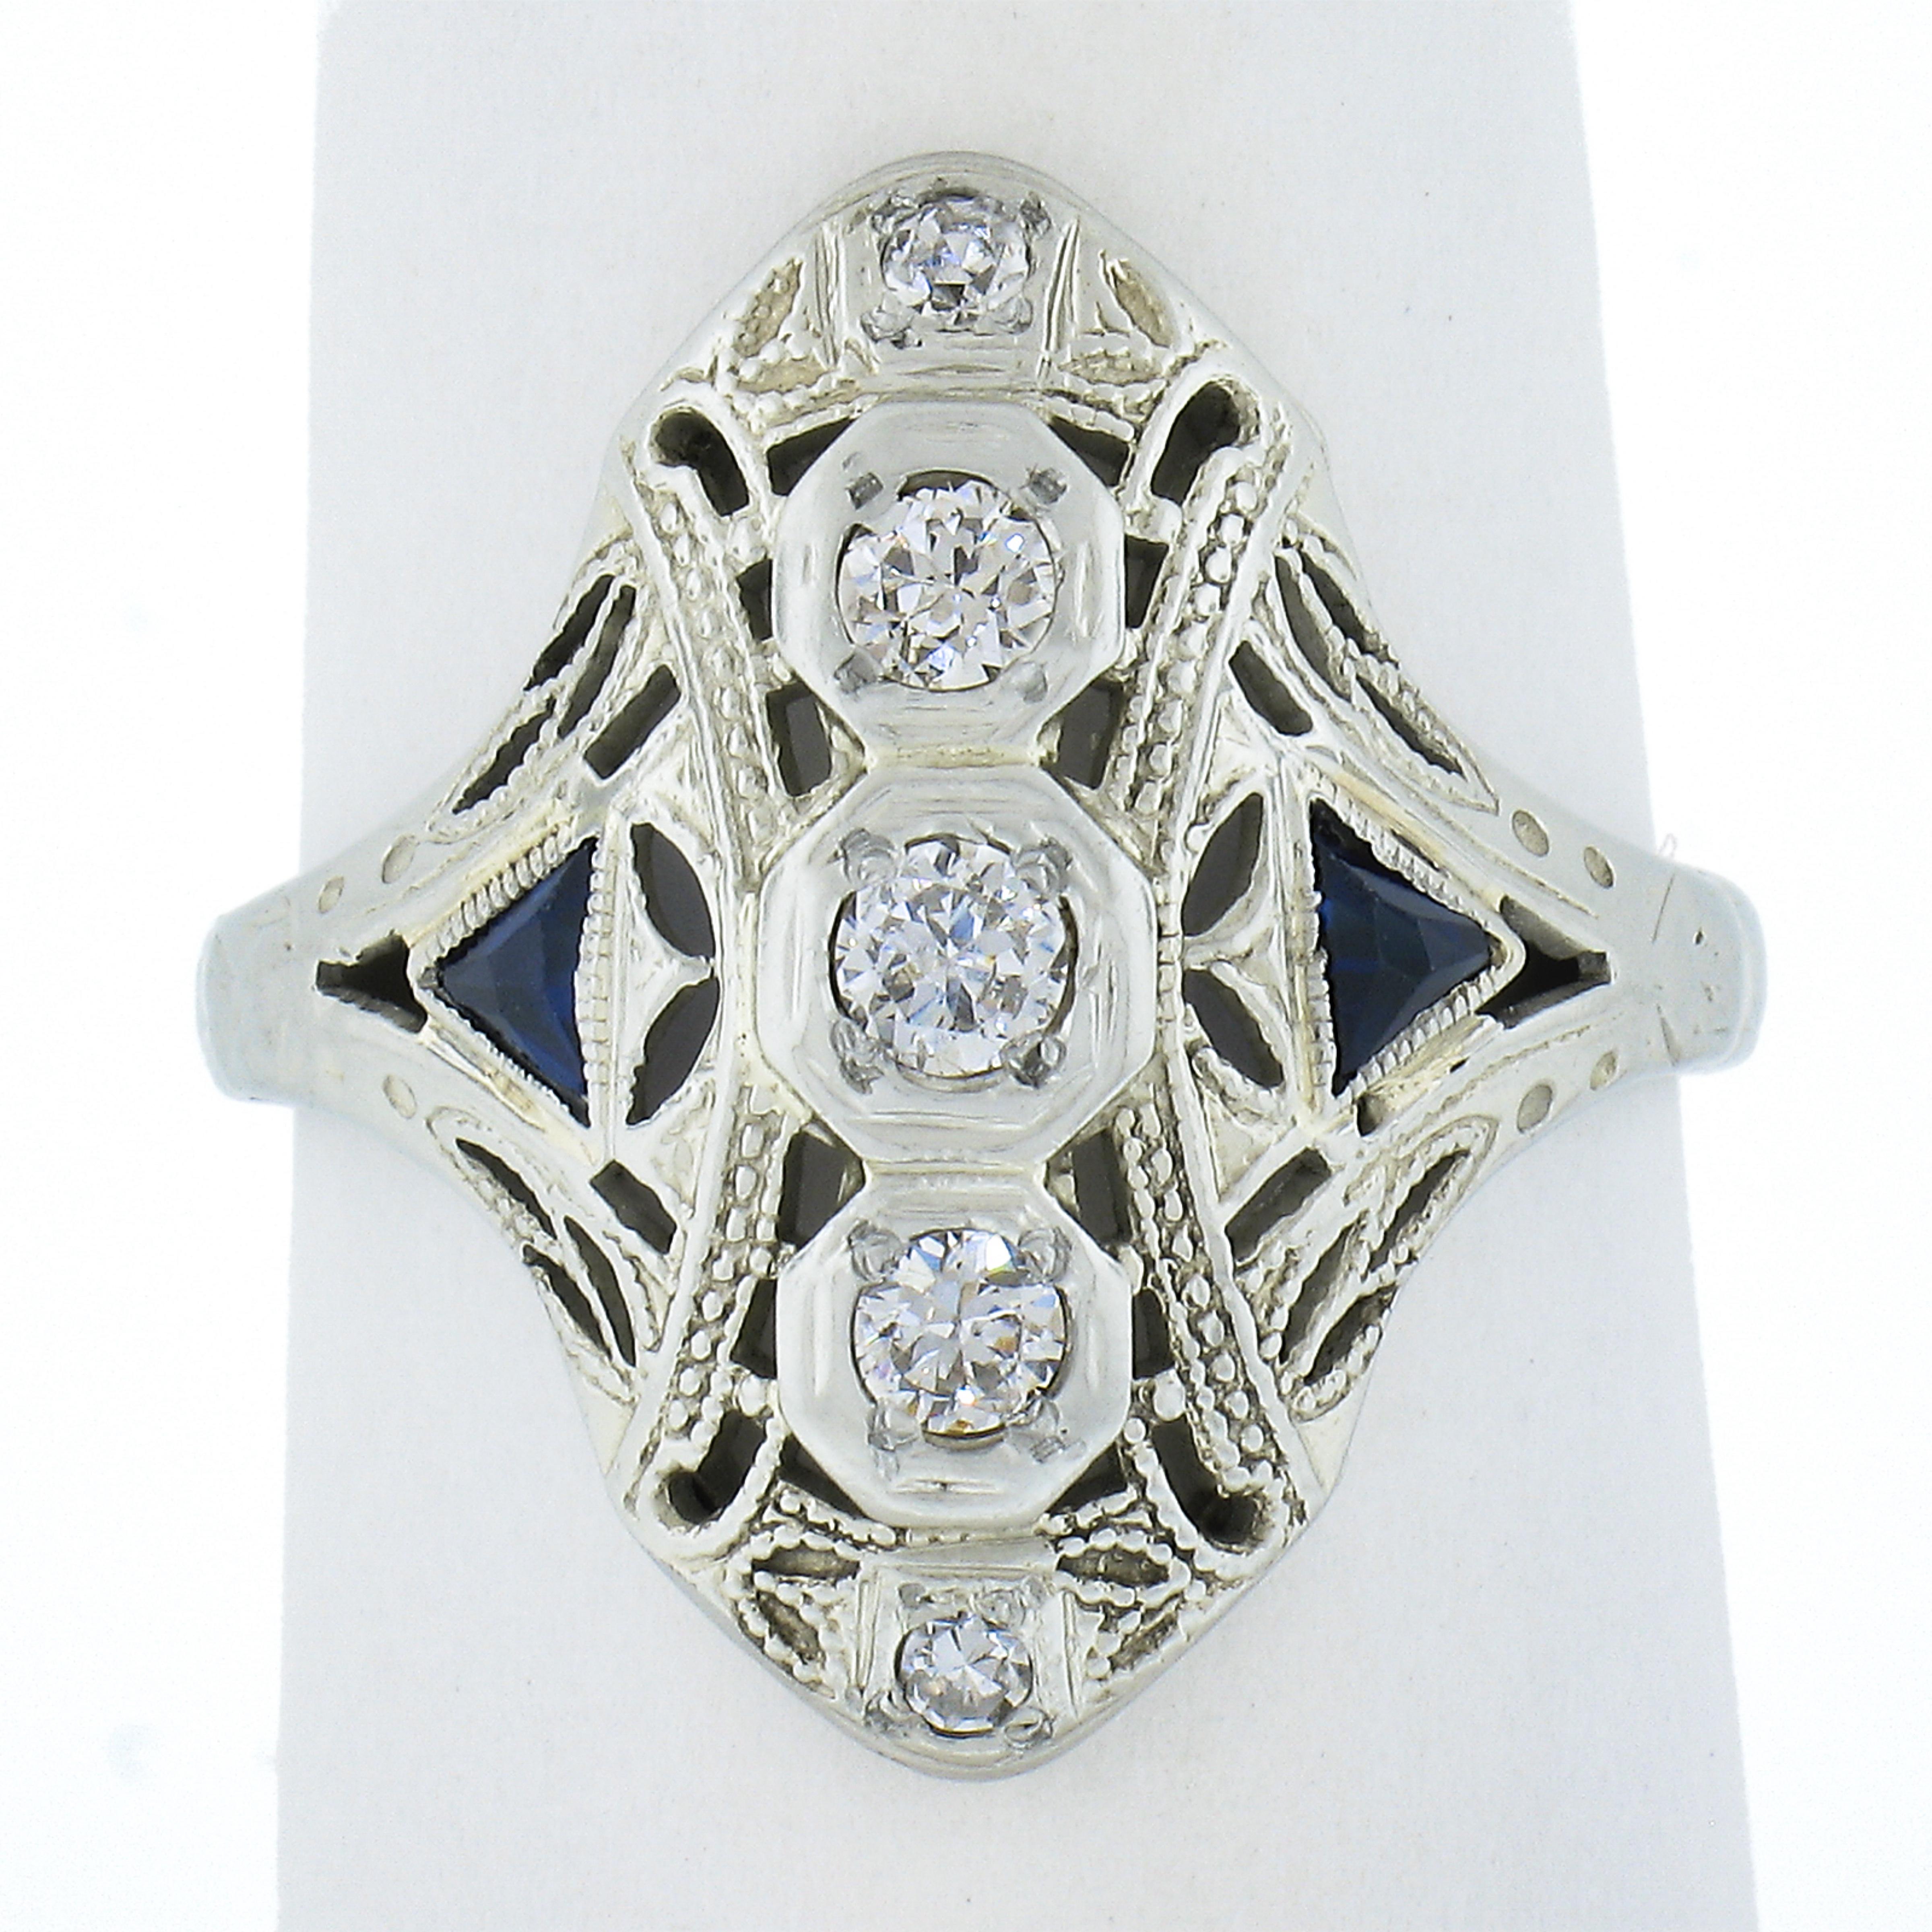 This outstanding antique dinner ring was crafted during the art deco period in solid 18k white gold. All original and screams Art Deco!. Enjoy!

--Stone(s):--
(5) Natural Genuine Diamonds - Old European & Single Cut - Prong Set - VS1/VS2 Clarity - G